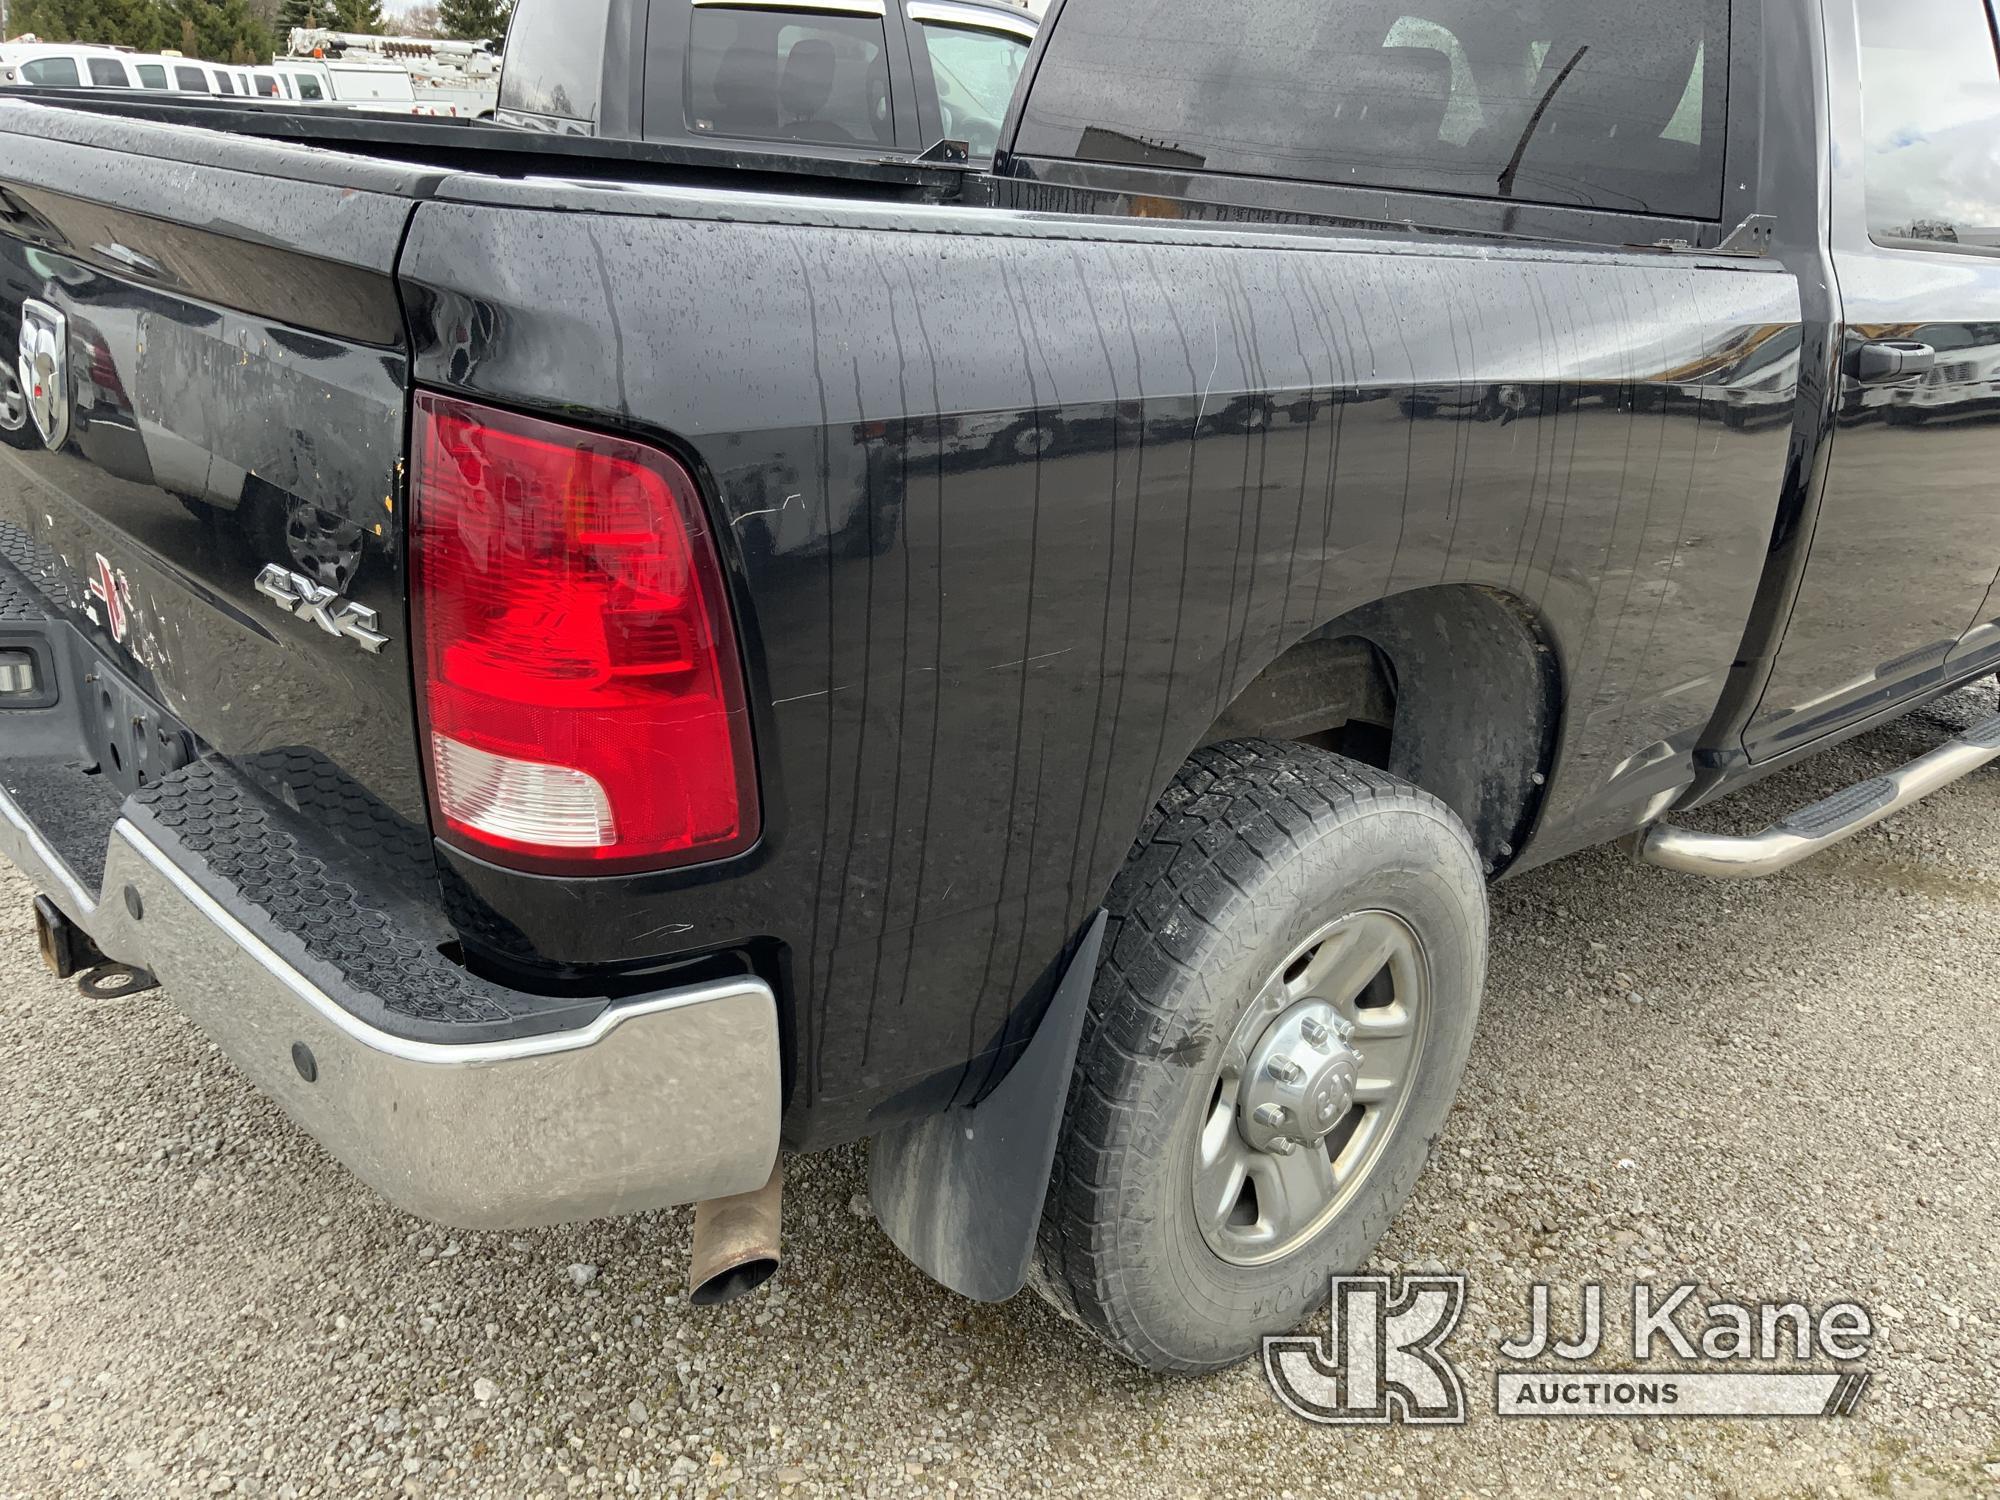 (Fort Wayne, IN) 2017 RAM 2500 4x4 Crew-Cab Pickup Truck Not Running, Condition Unknown, No Crank, E